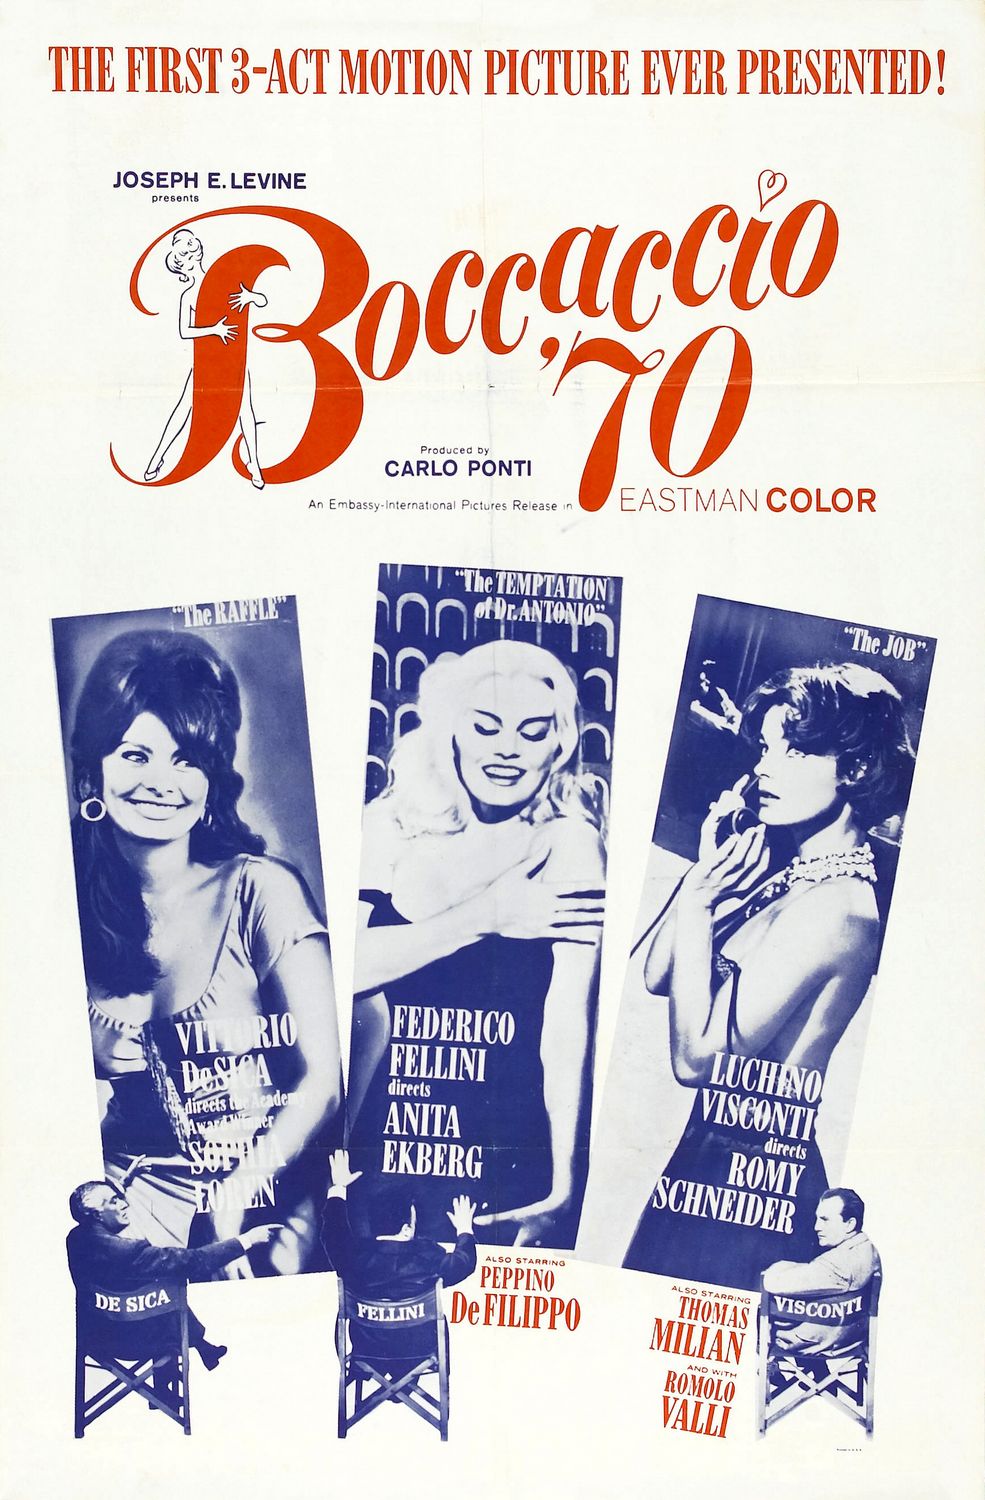 Extra Large Movie Poster Image for Boccaccio '70 